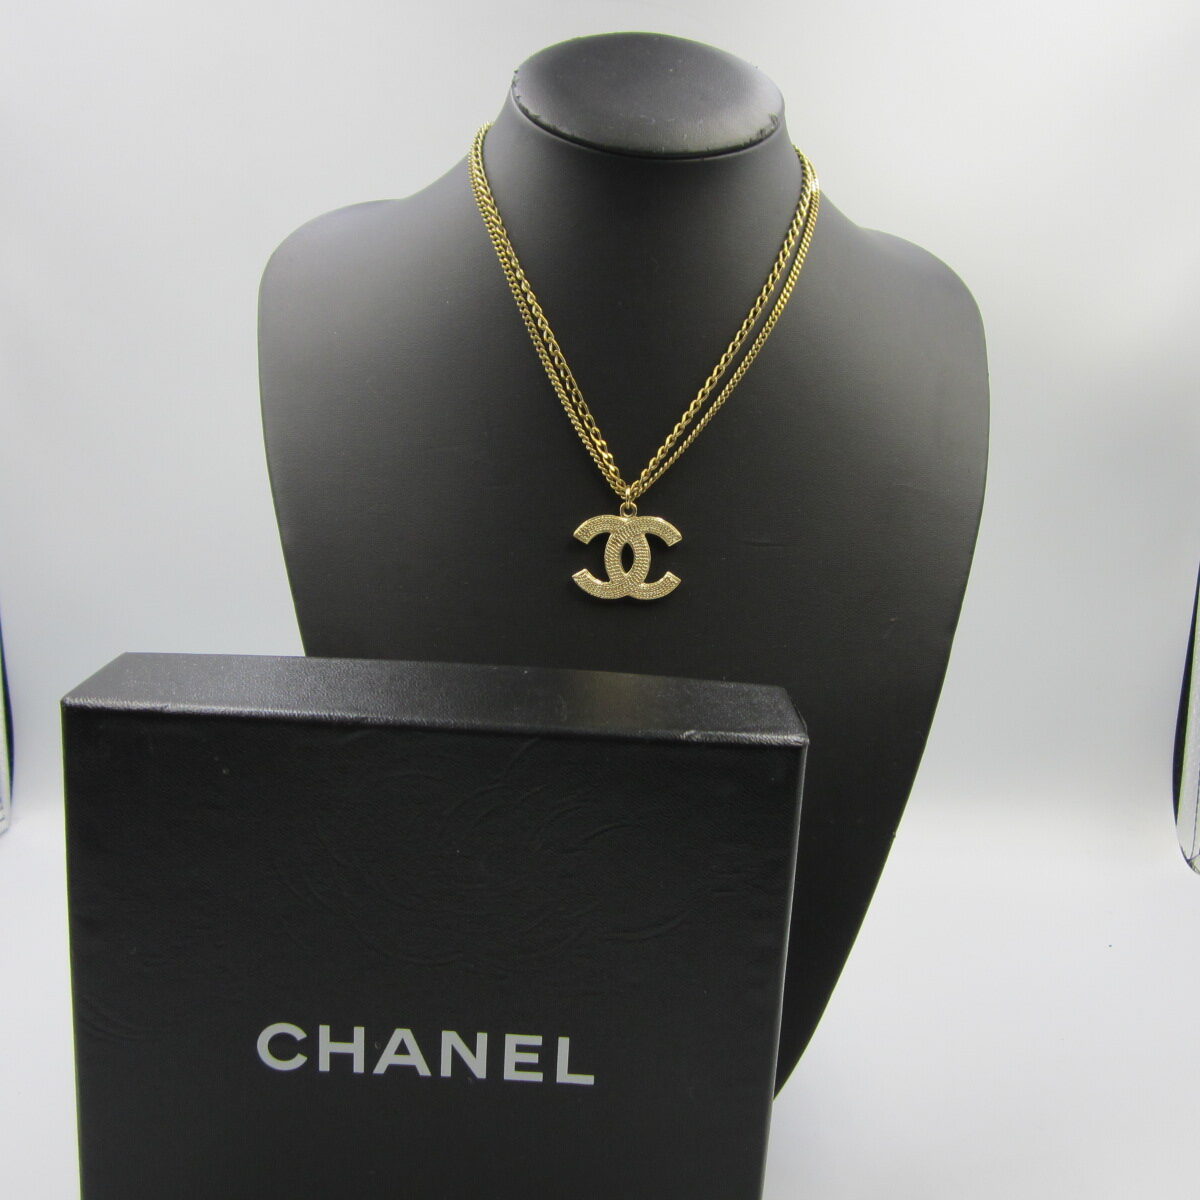 CHANEL ネックレス 質屋鑑定済み - ネックレス